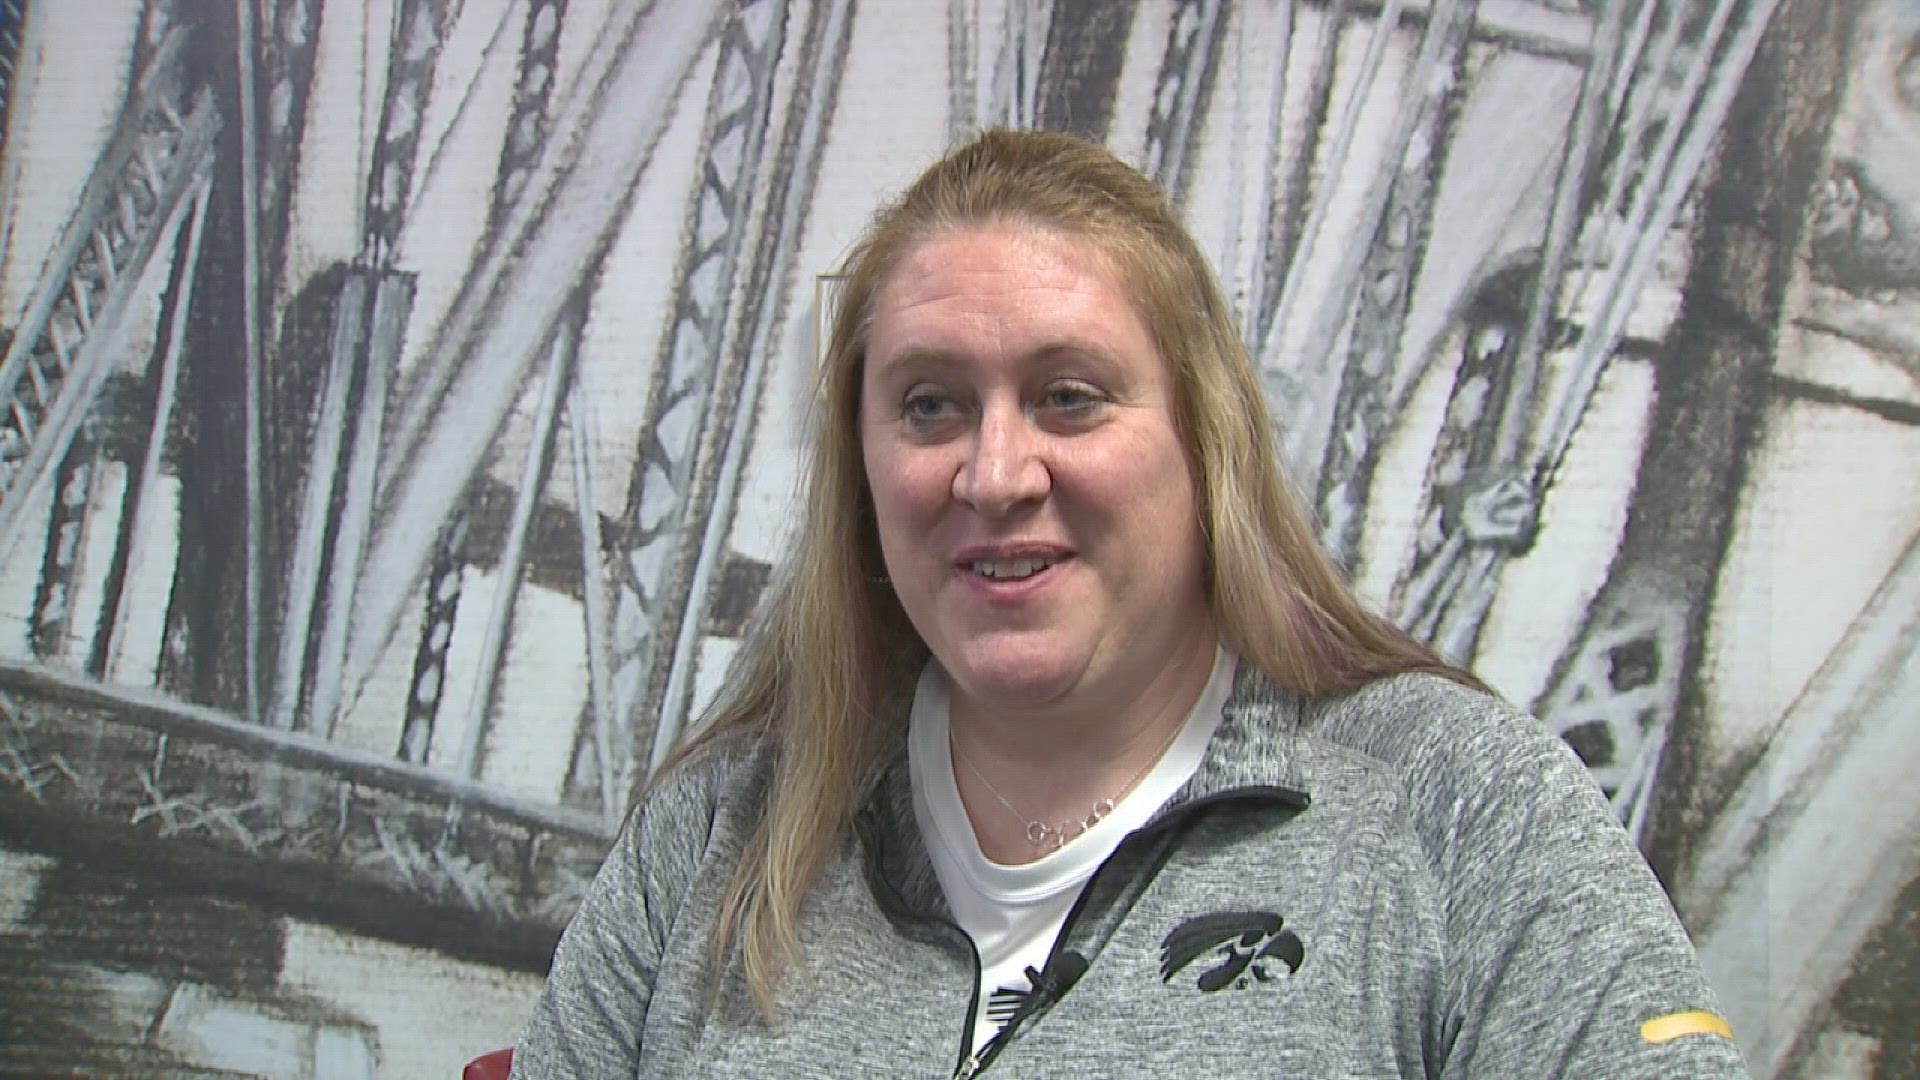 The Clinton head coach reminisced about her days in the Final Four back in 1993.